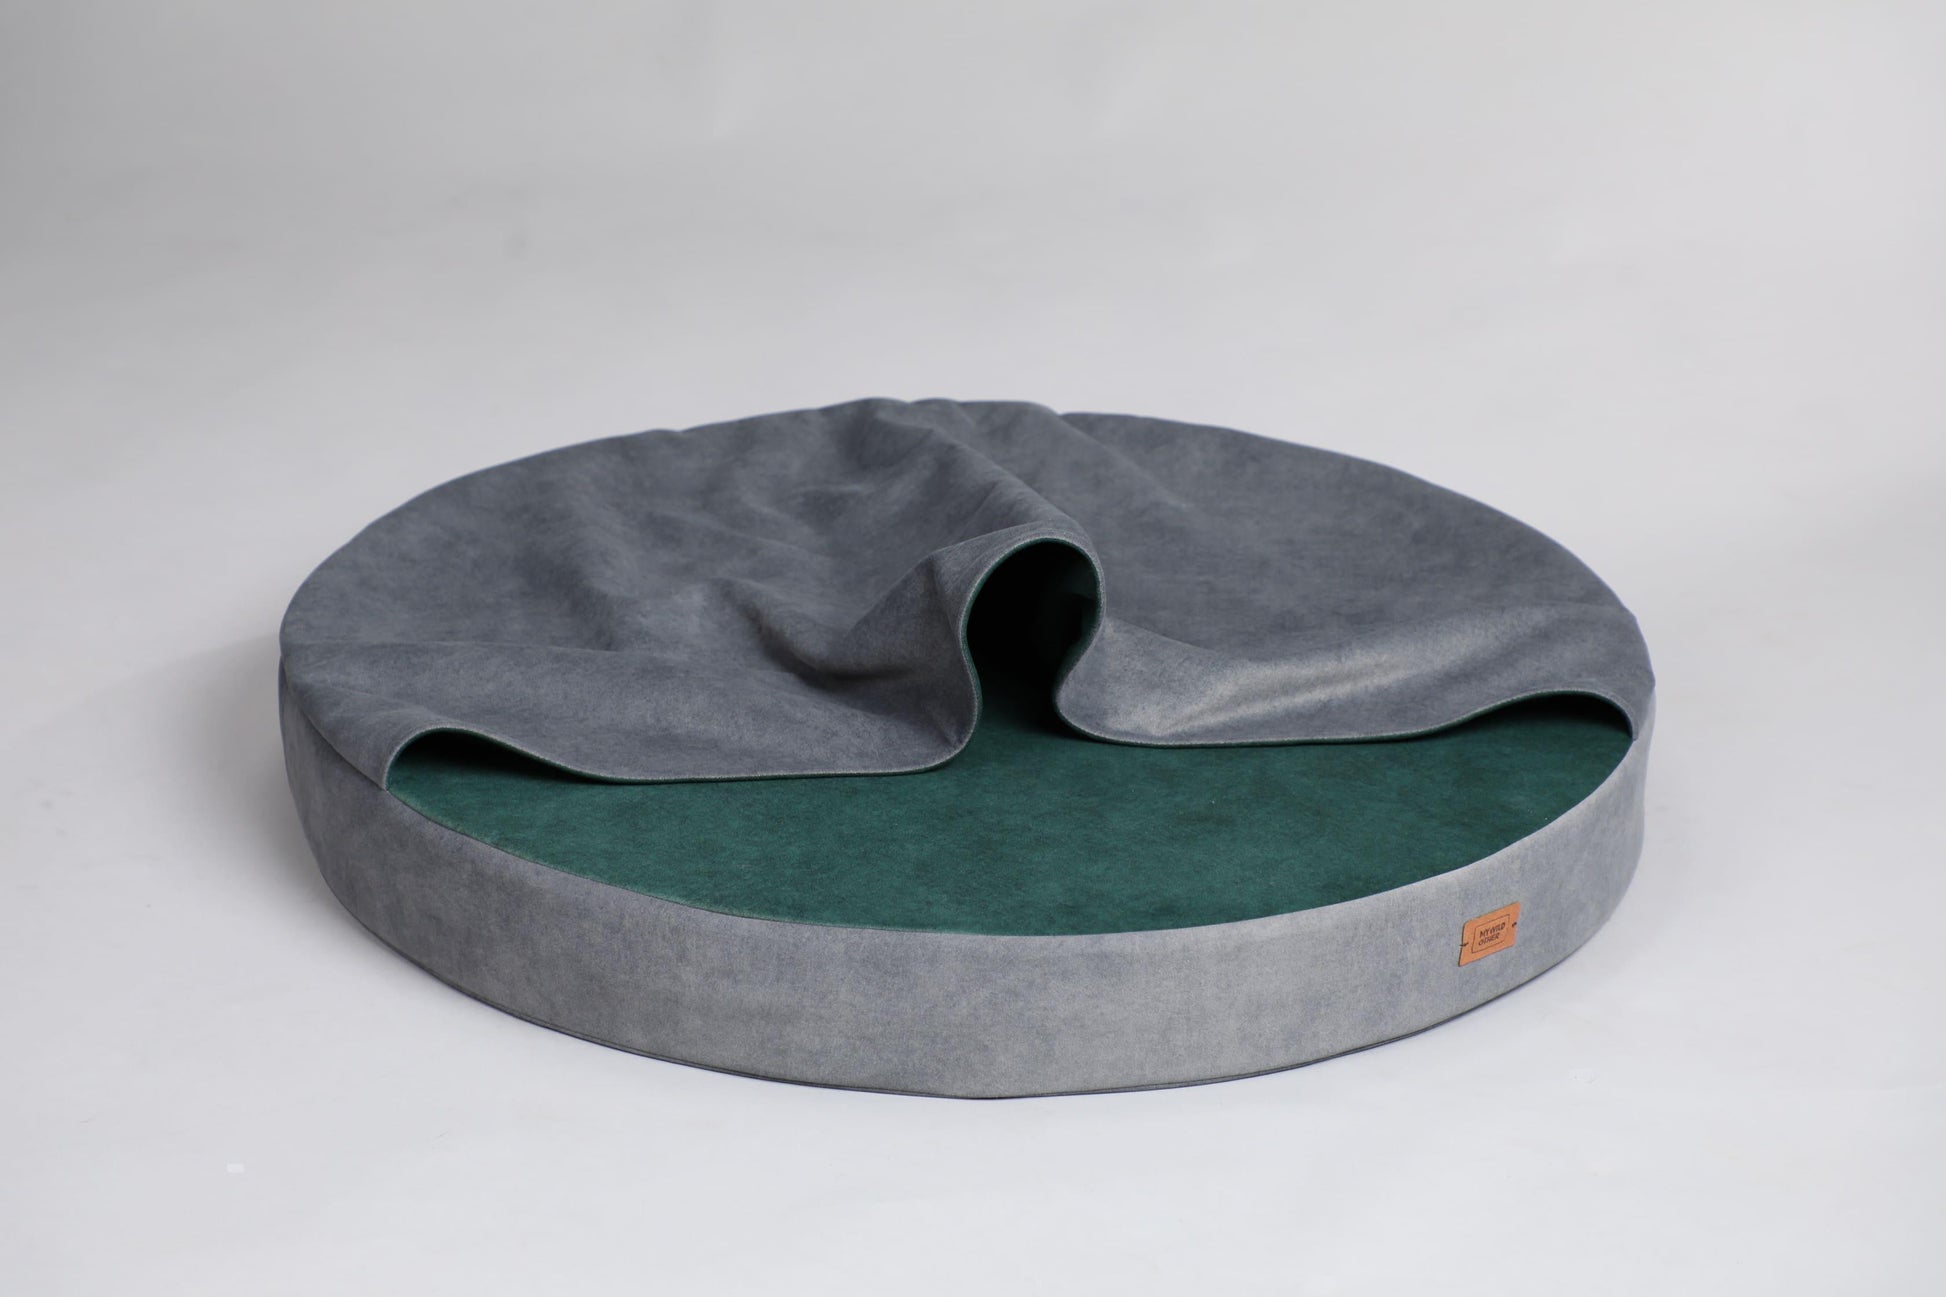 Cozy cave dog bed | STEEL GREY+MOSS GREEN - premium dog goods handmade in Europe by My Wild Other